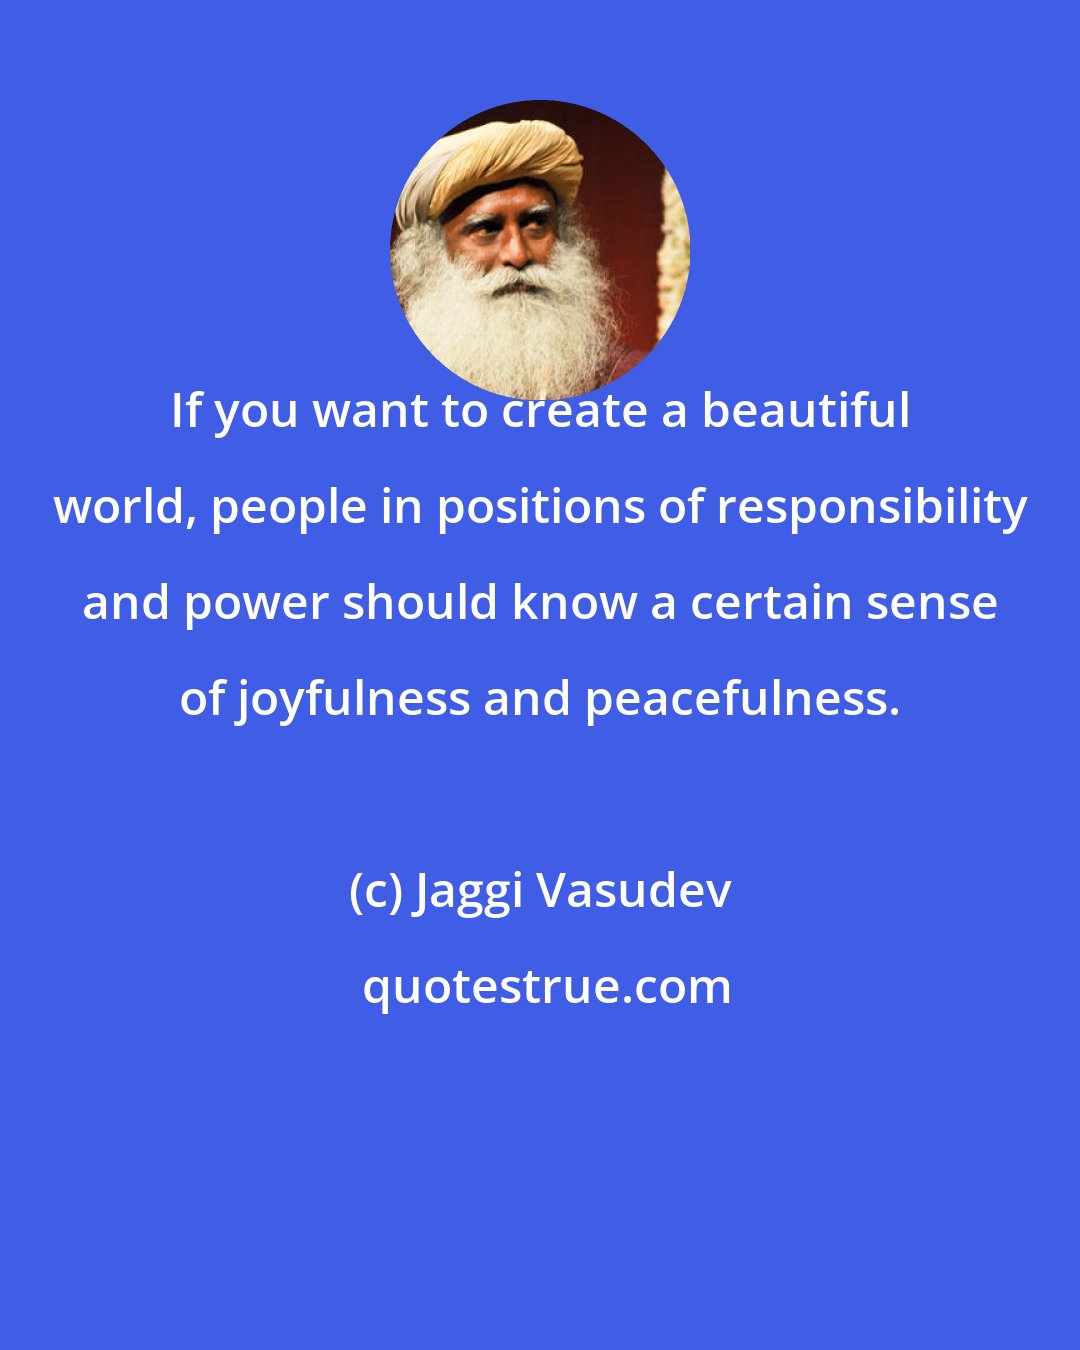 Jaggi Vasudev: If you want to create a beautiful world, people in positions of responsibility and power should know a certain sense of joyfulness and peacefulness.